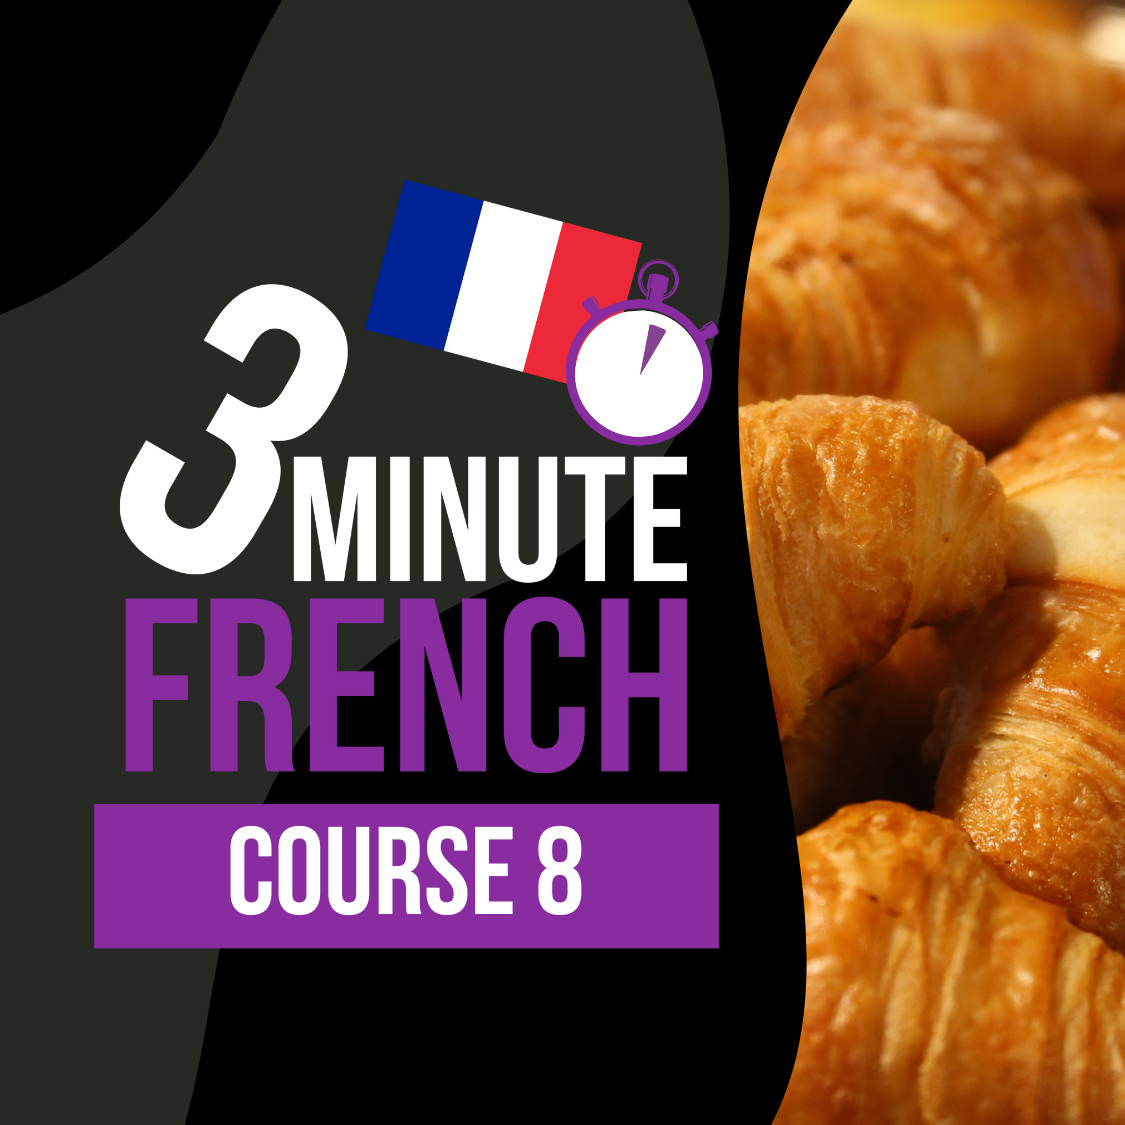 3 Minute French - Course 8